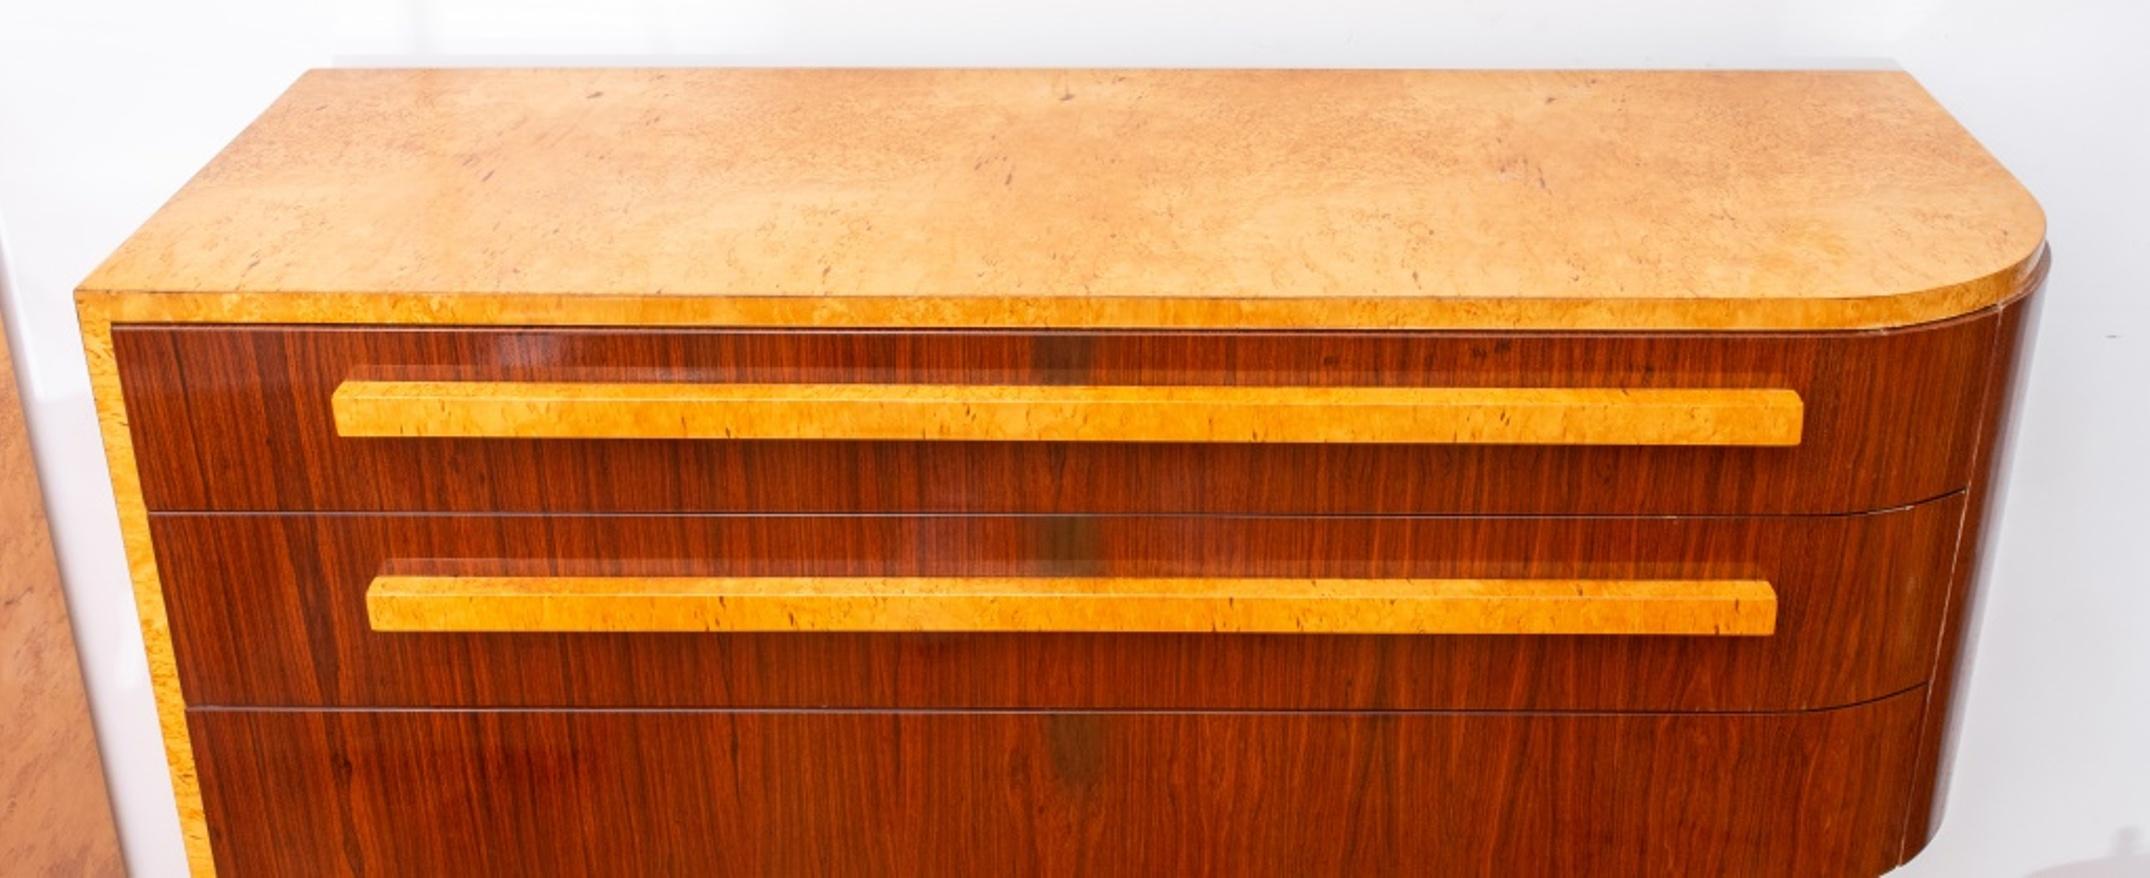 Donald Deskey (American, 1894-1989) Art Deco console sideboard with large drawers in the streamline moderne taste, lacquered burlwood. This piece was designed by Deskey and manufactured by Schmieg, Hungate & Kotzian, Inc. in New York City, circa